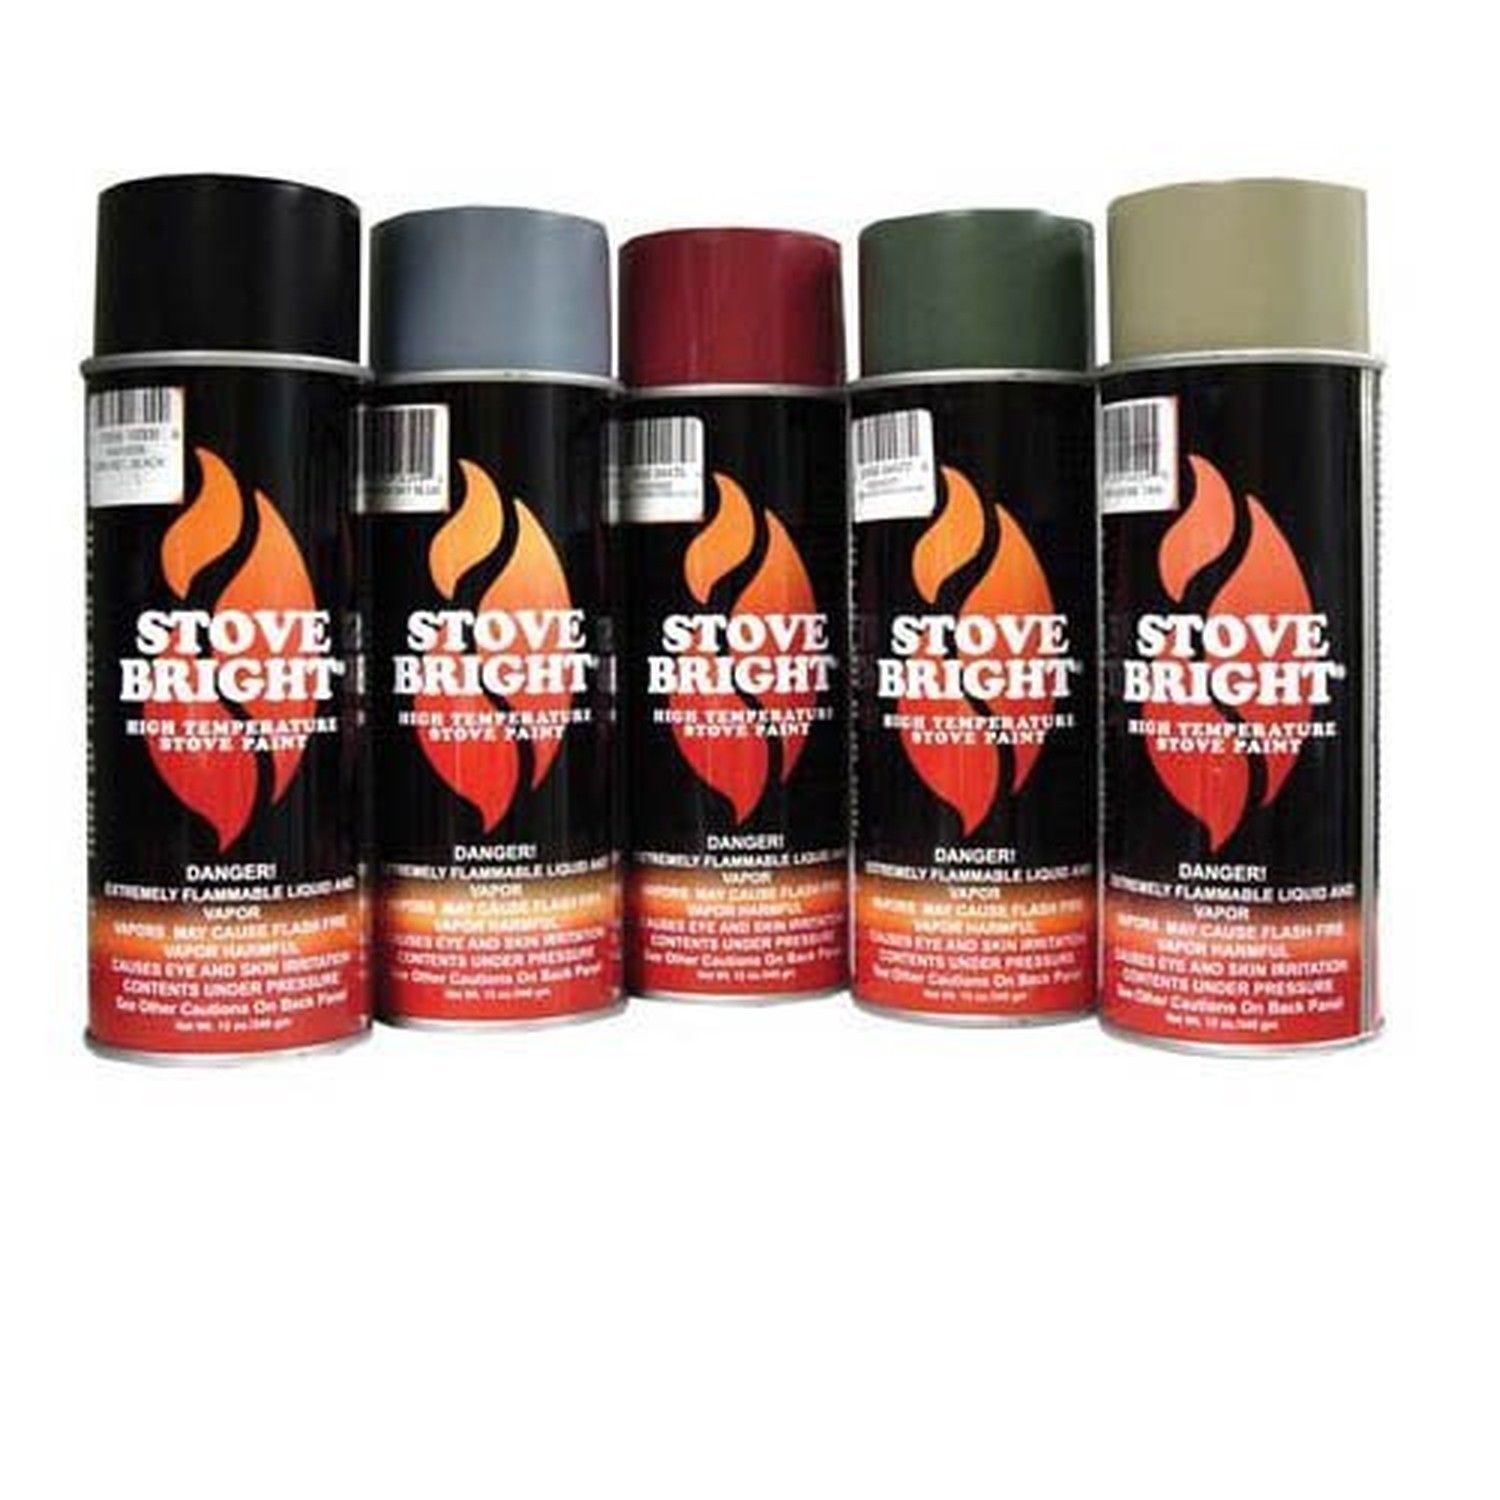 Stove Bright High Temperature Stove, Chimney & Fireplace Paint 12oz. Aerosol Can